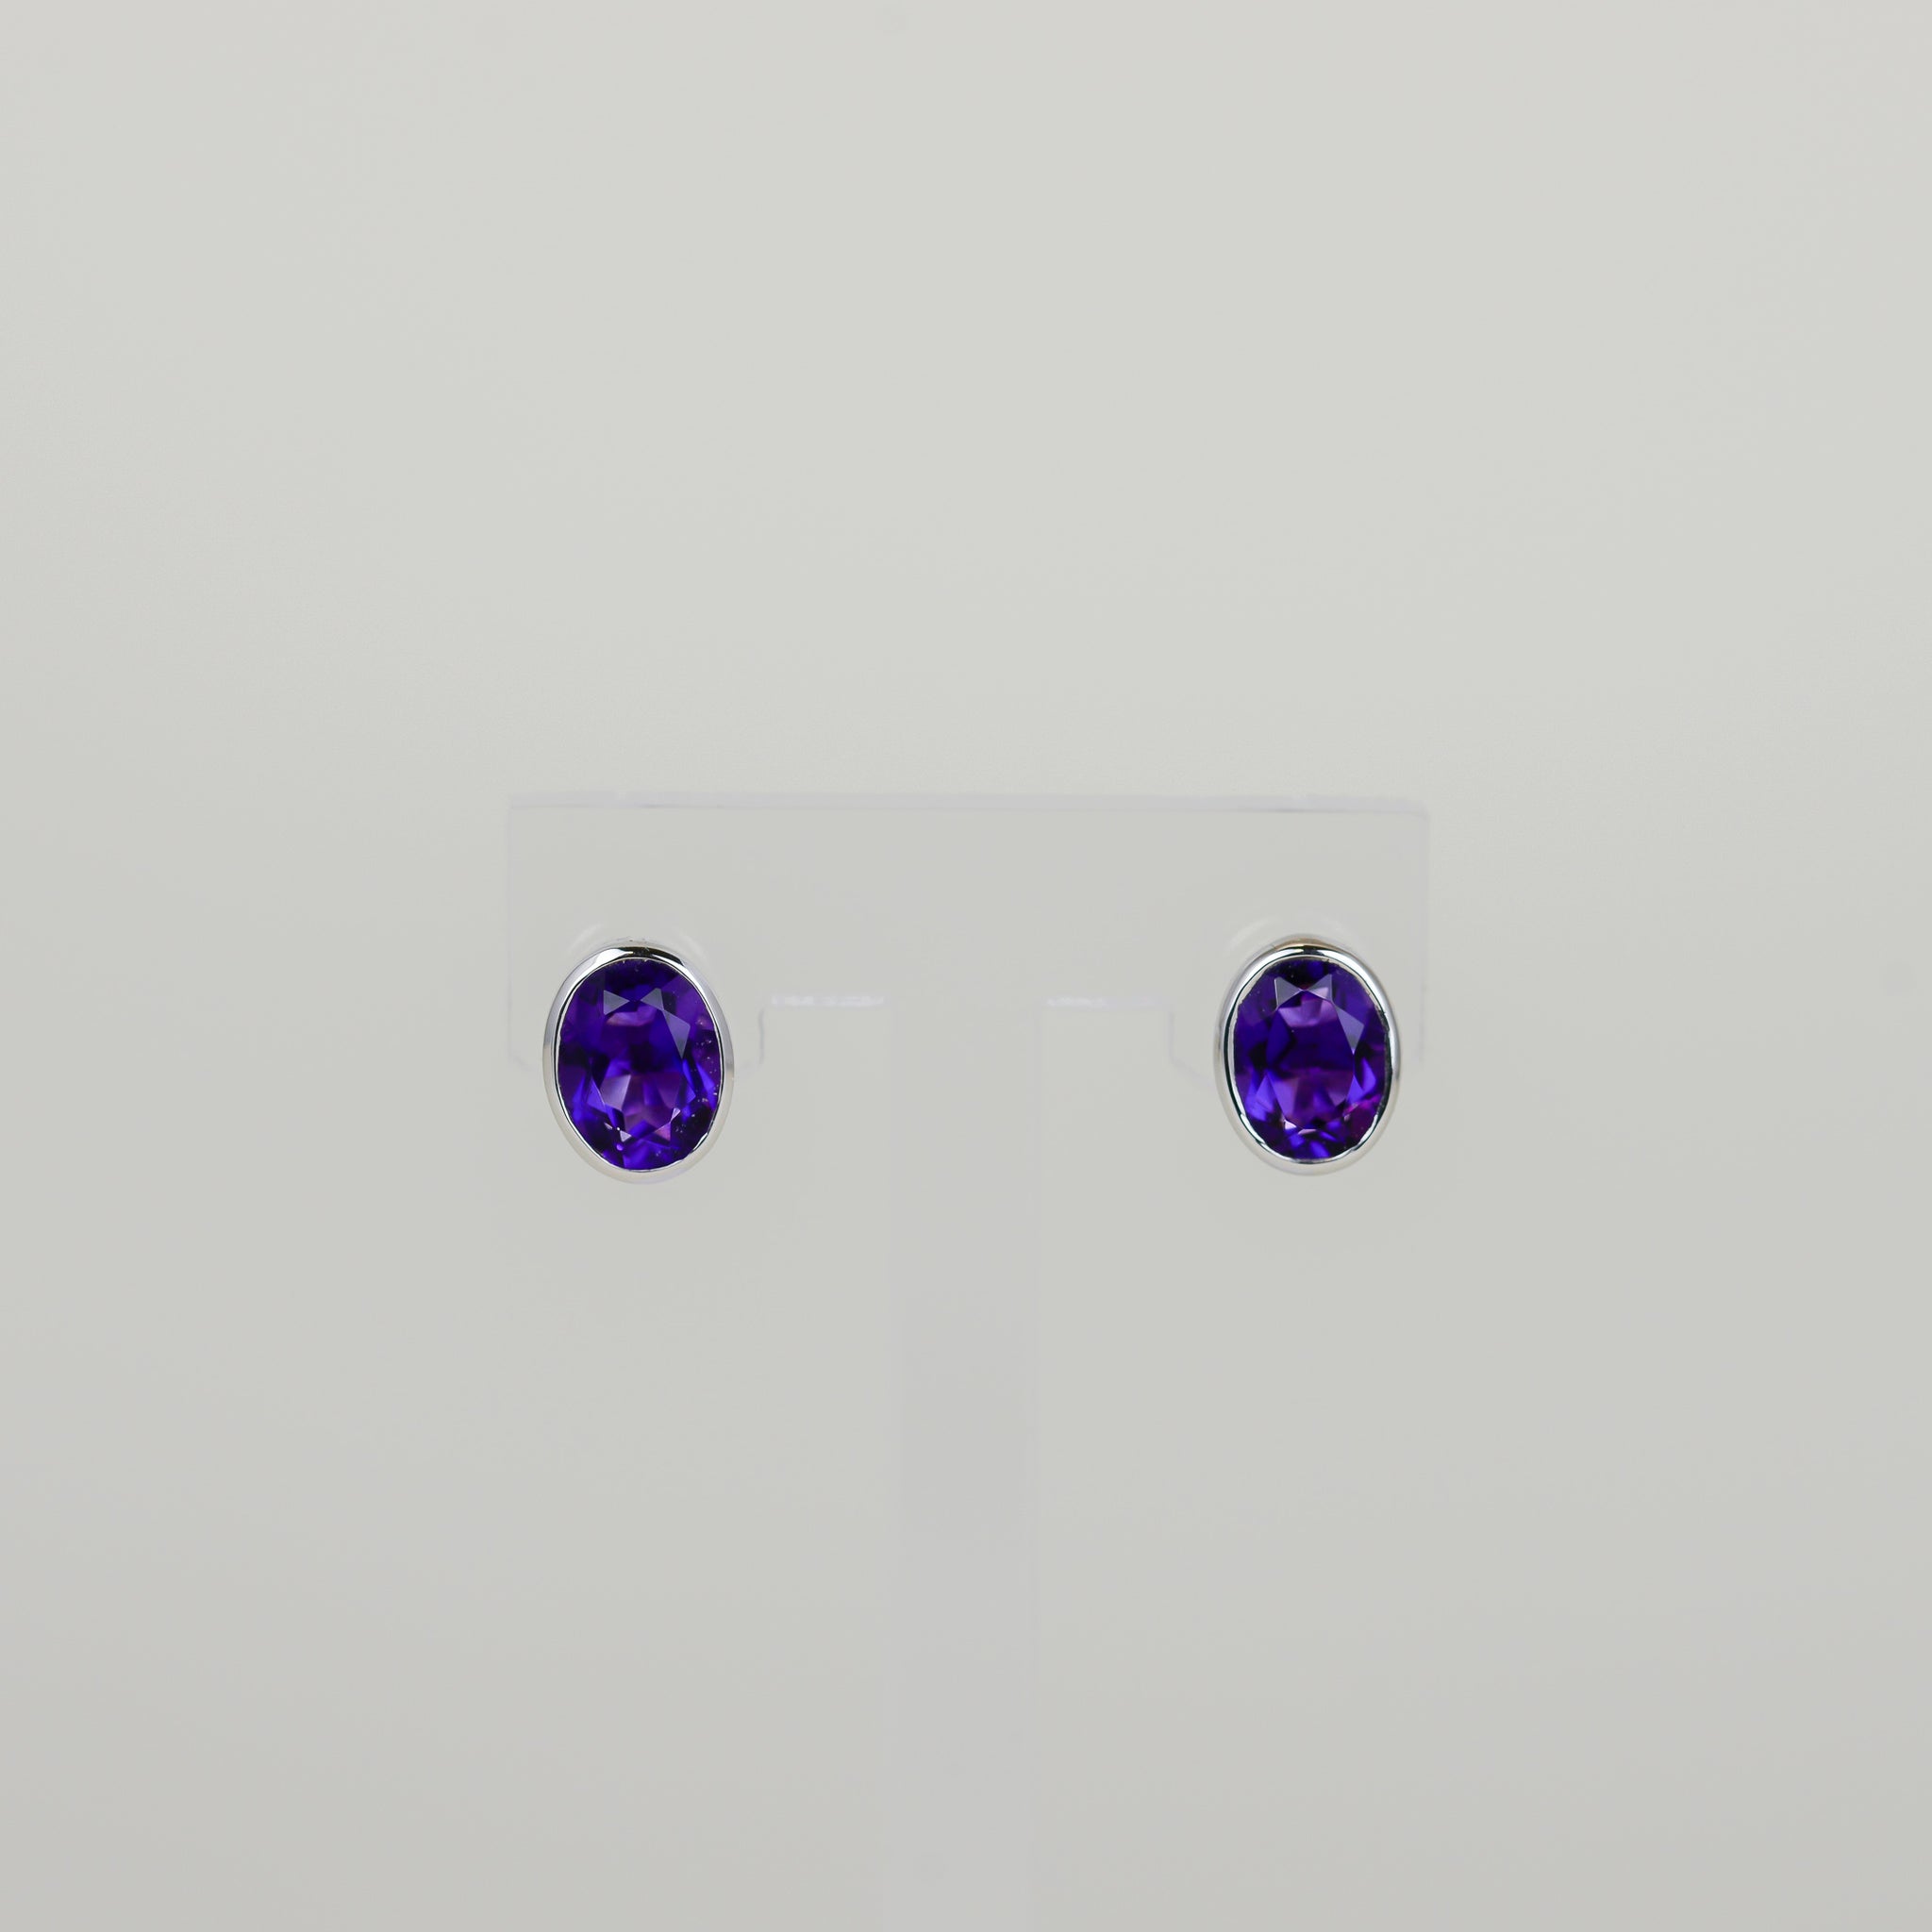 9ct White Gold 2.57ct Oval Amethyst Earrings